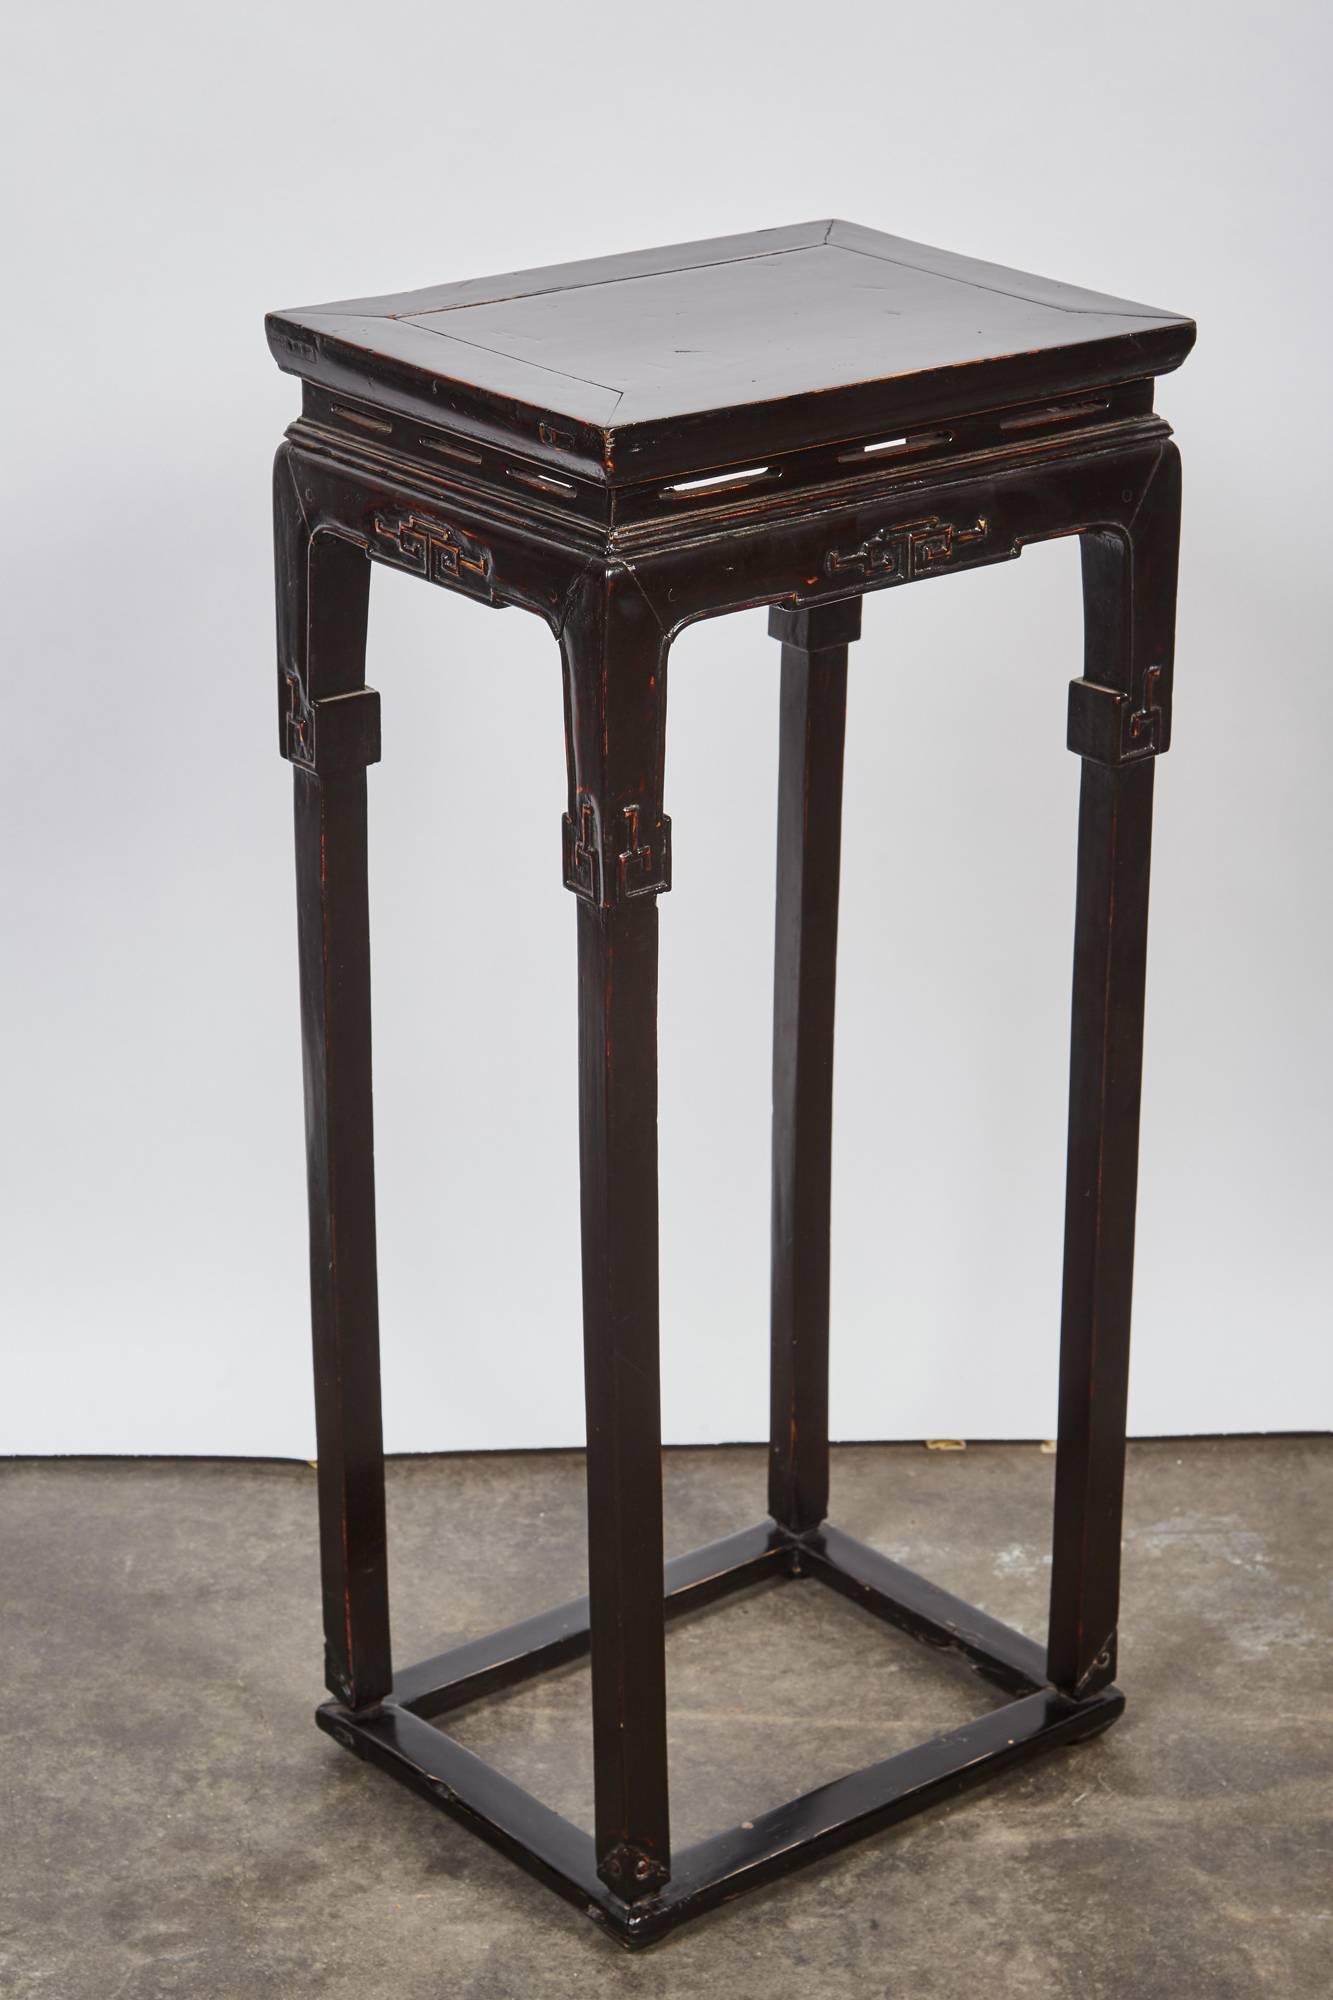 Pair of 18th century Chinese rectangular hardwood tall think black lacquer tea tables with beautiful hand-carved details in the panels and on the foot of the legs. These twin tea tables are originally from Shanxi, China.